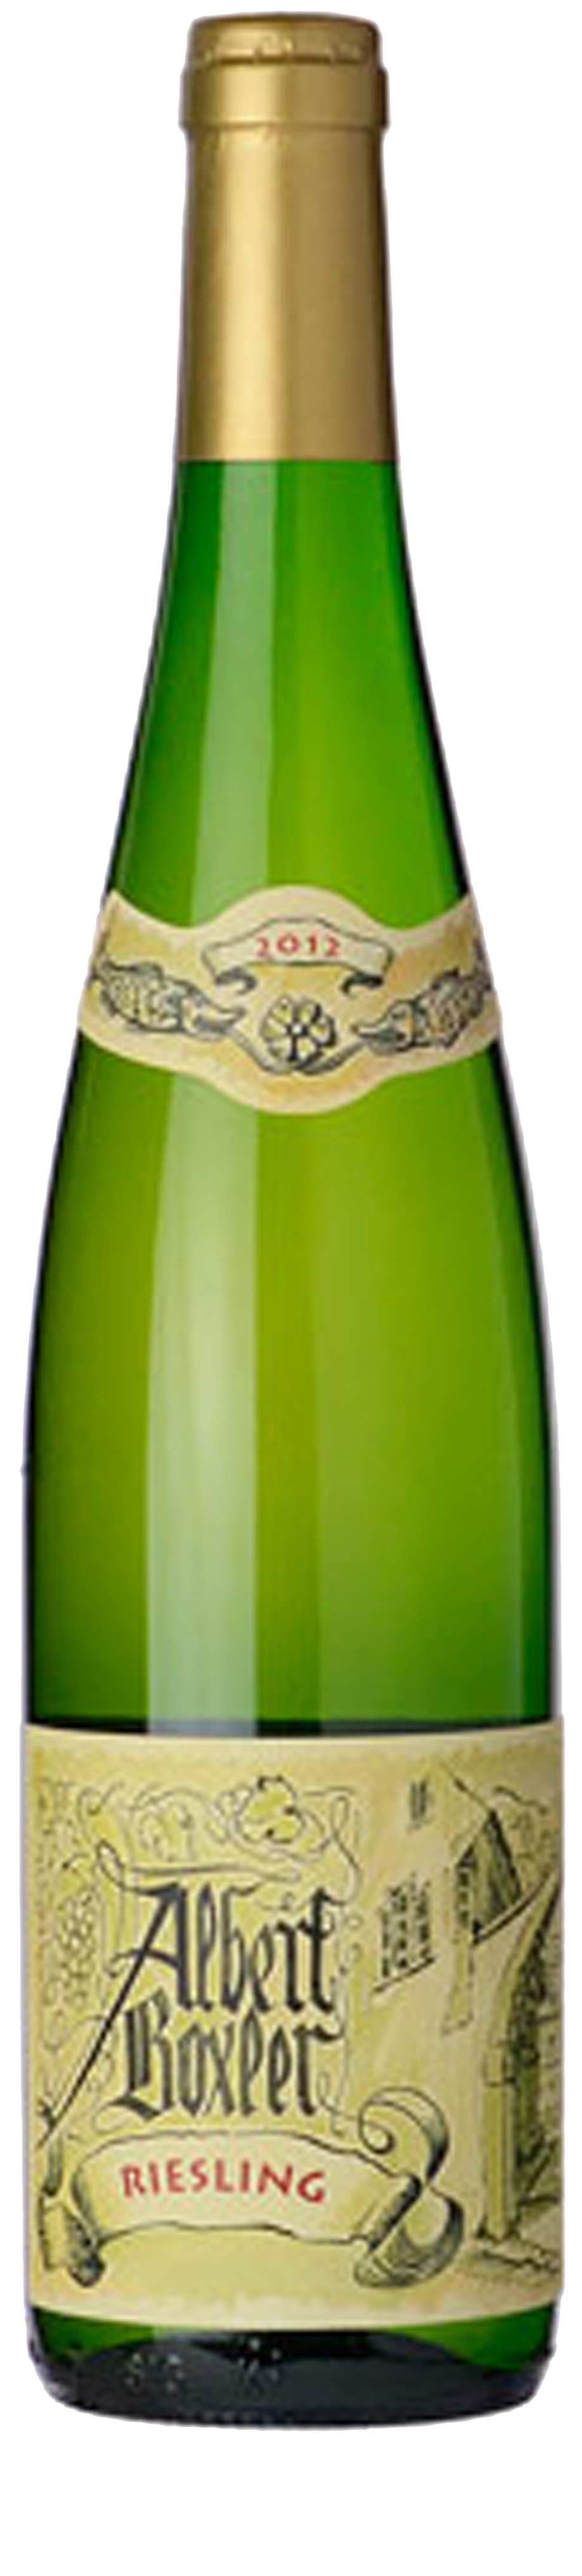 Bottle shot of 2012 Riesling Grand Cru Zinnkoepfle Select Grains Noble